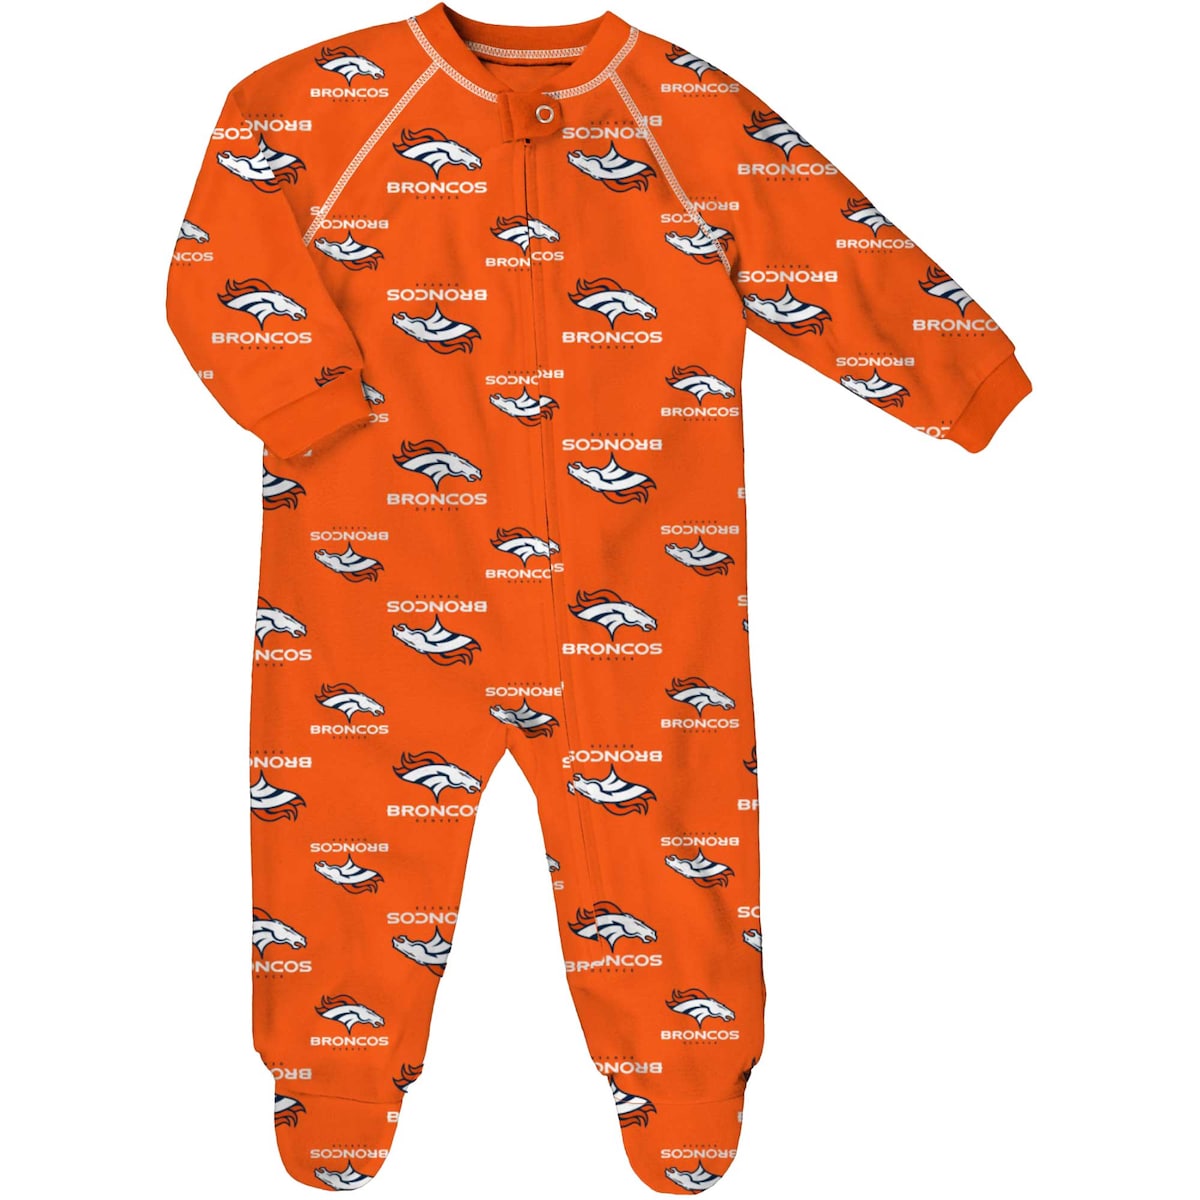 Provide your budding Denver Broncos fan with comfort and spirit each night by dressing them in this full-zip jumper. It features roomy raglan sleeves so they can stretch, crawl and sleep in comfort. An allover Denver Broncos print easily displays which team they'll root for each Sunday.ImportedMachine wash with garment inside out, tumble dry lowFlame resistantSublimated graphicsMaterial: 100% PolyesterFull-zipRaglan sleevesLong sleeveFooted with non-slip dotsFlatlock stitchingSnap closure at neckOfficially licensedBrand: Outerstuff